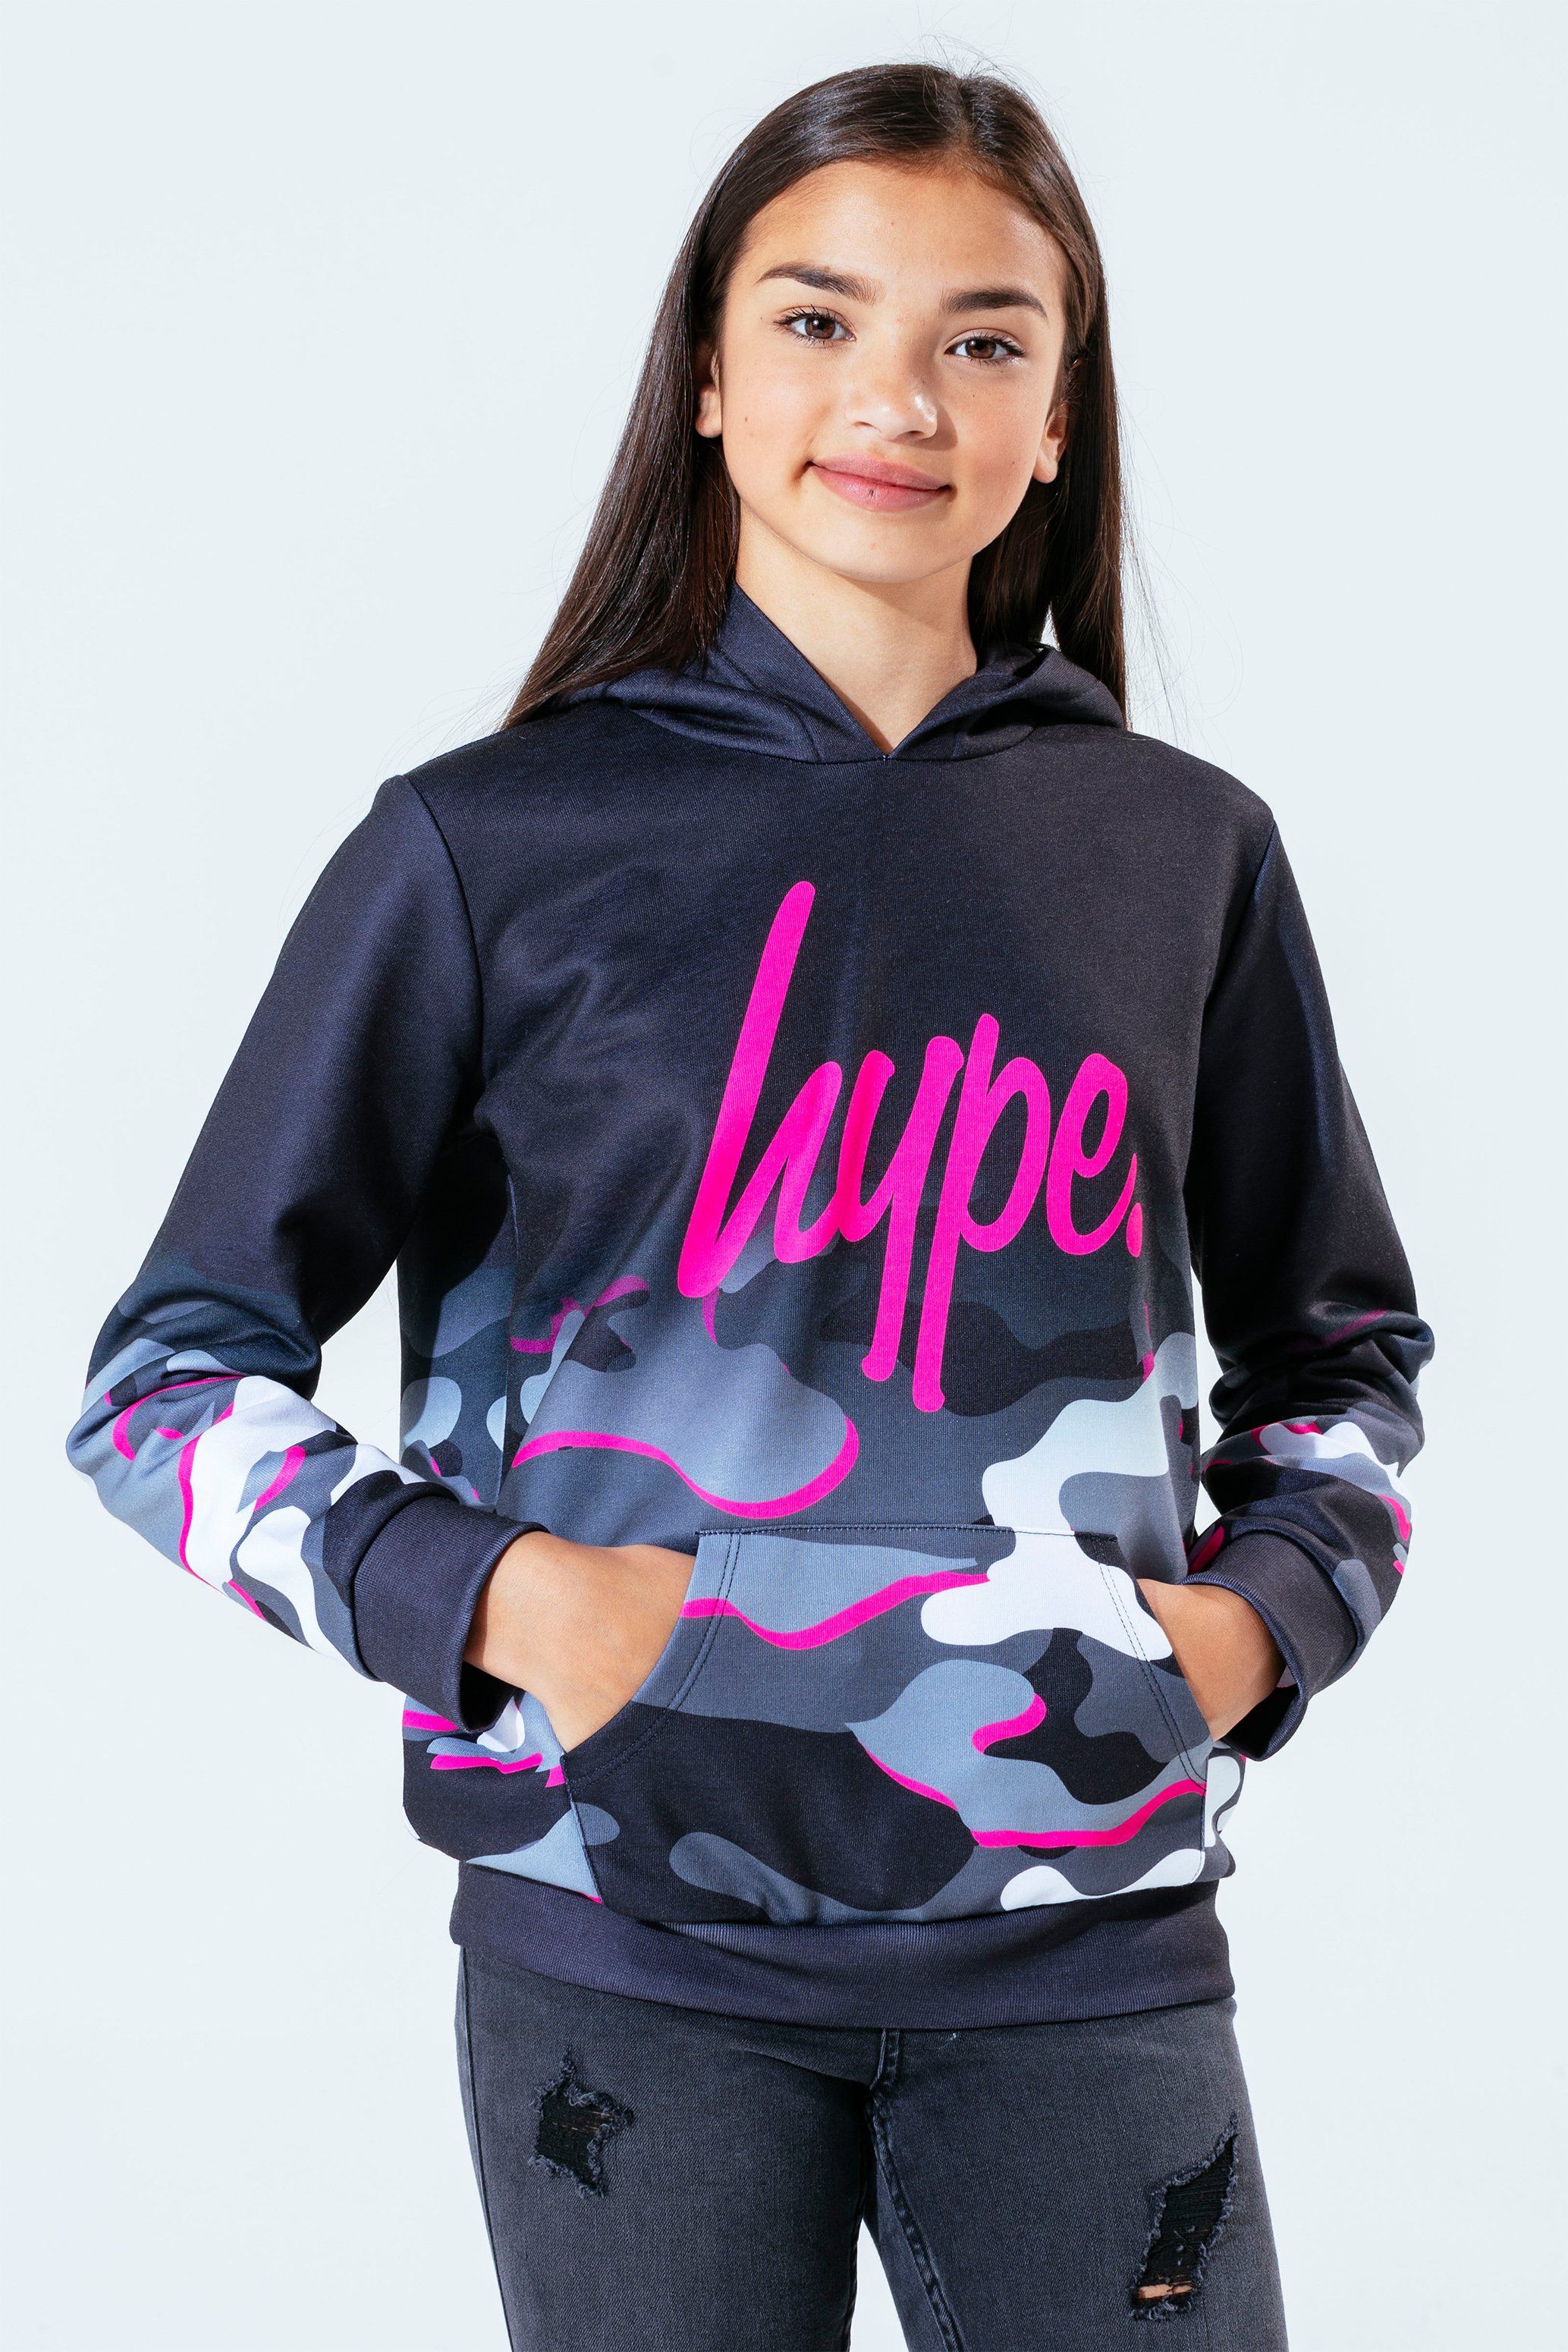 The Hype. pink line camo girls hoodie features our signature camo print in a monochrome, grey and pink injection colour palette. In a 95% polyester and 5% cotton fabric base for supreme comfort in our standard kids pullover shape, highlighting a fixed hood, kangaroo pocket and fitted hem and cuffs. Finished with the iconic HYPE. script logo in a holographic fabric. Wear with cycle shorts for an on-trend look. Machine wash at 30 degrees.